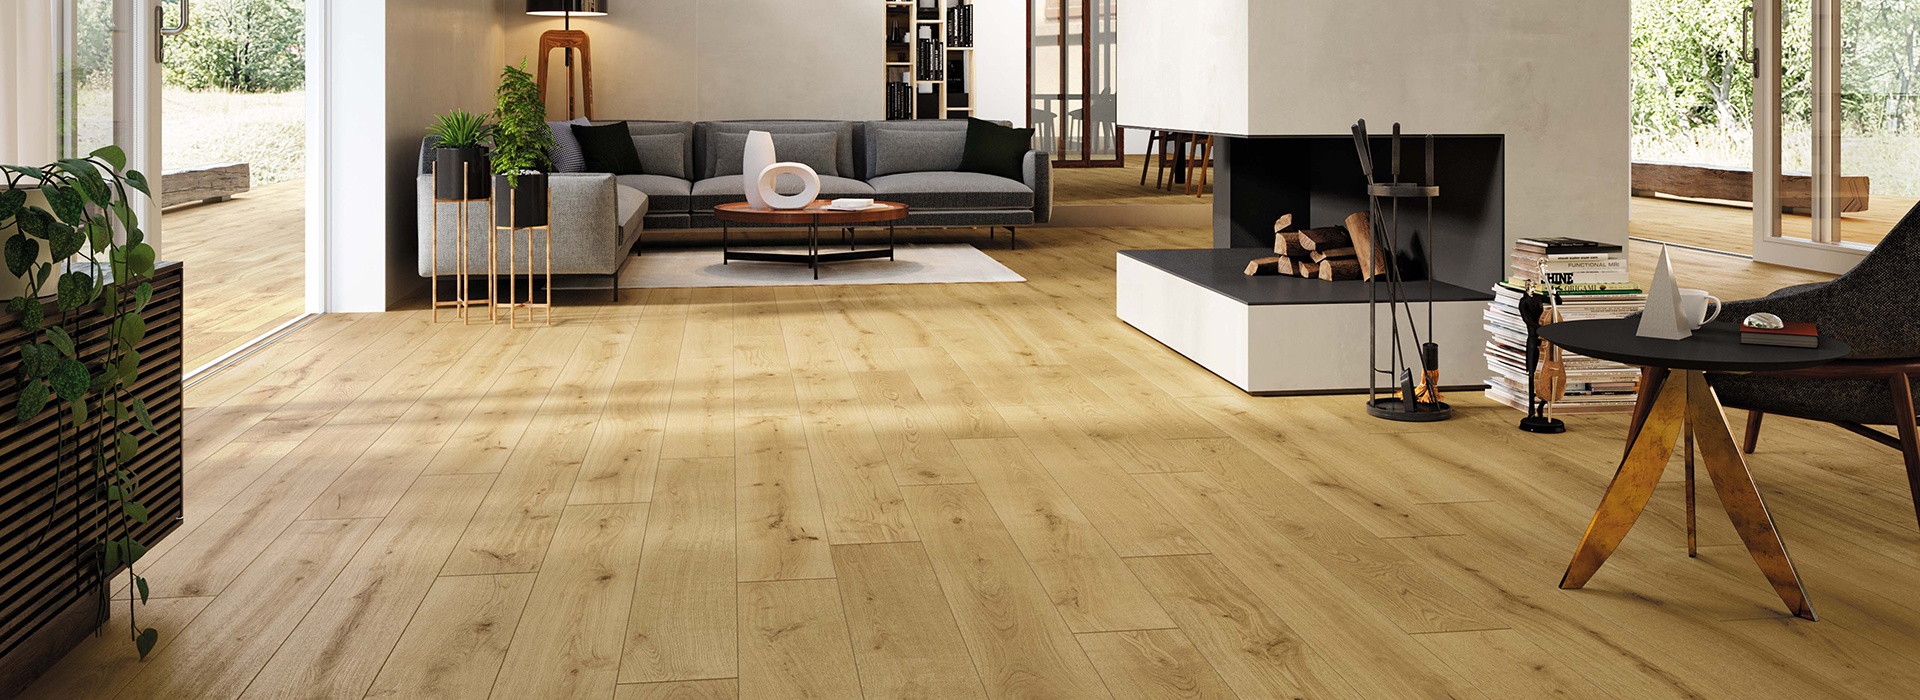 Italtile Introduces Exence By Atlas Concorde